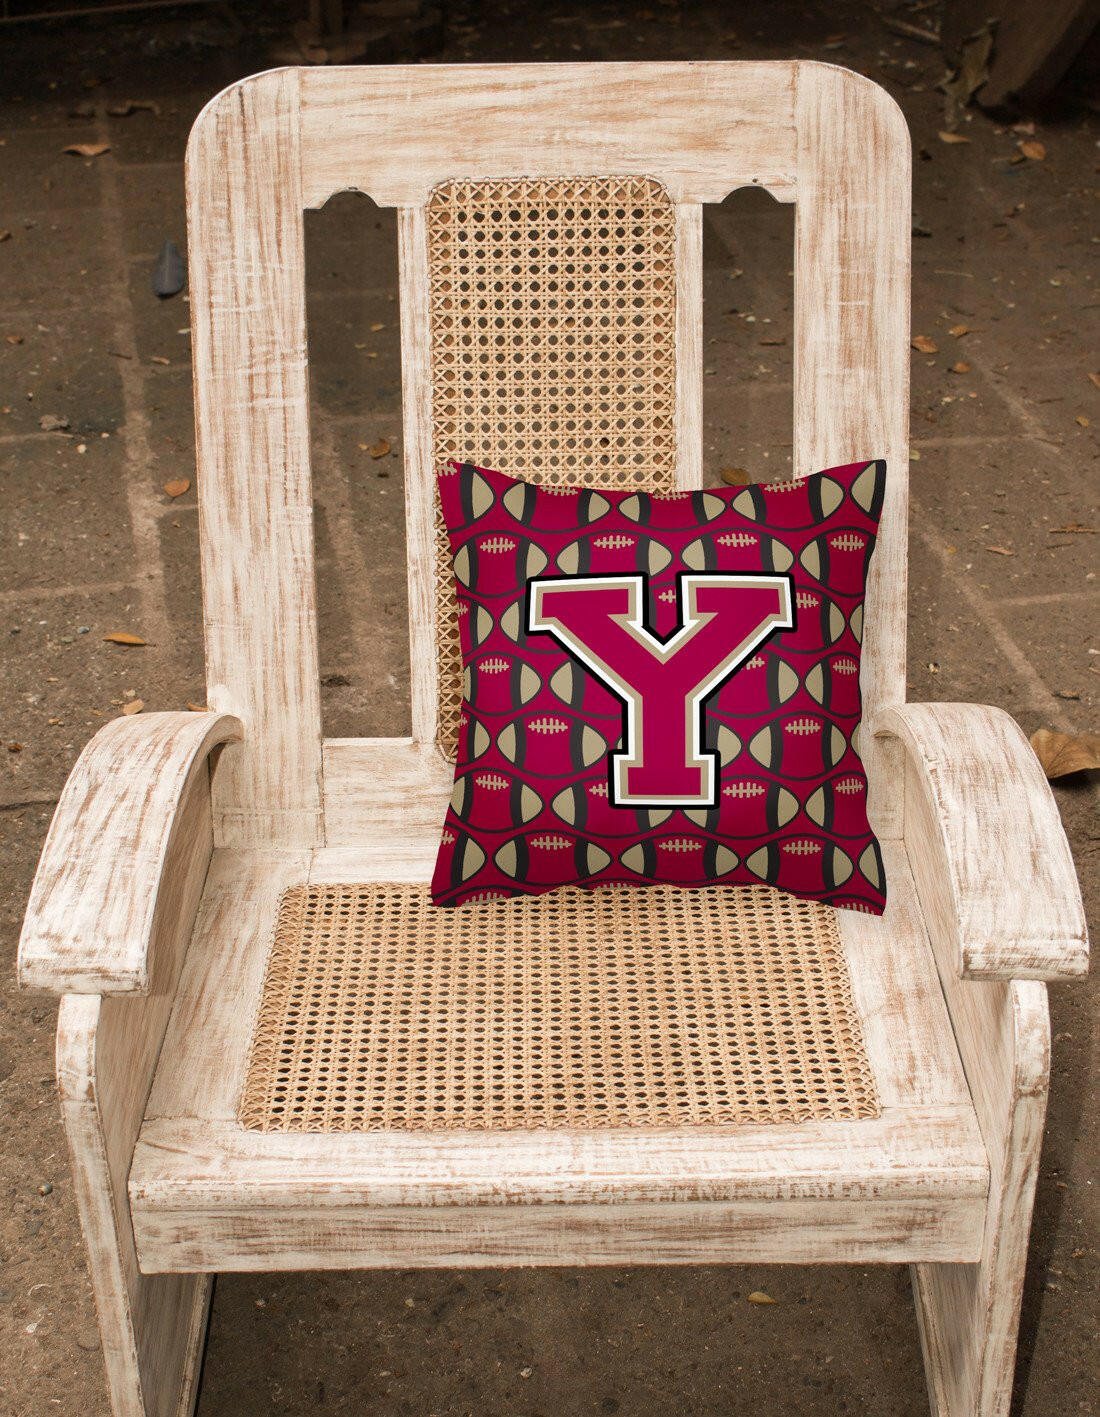 Letter Y Football Garnet and Gold Fabric Decorative Pillow CJ1078-YPW1414 by Caroline's Treasures